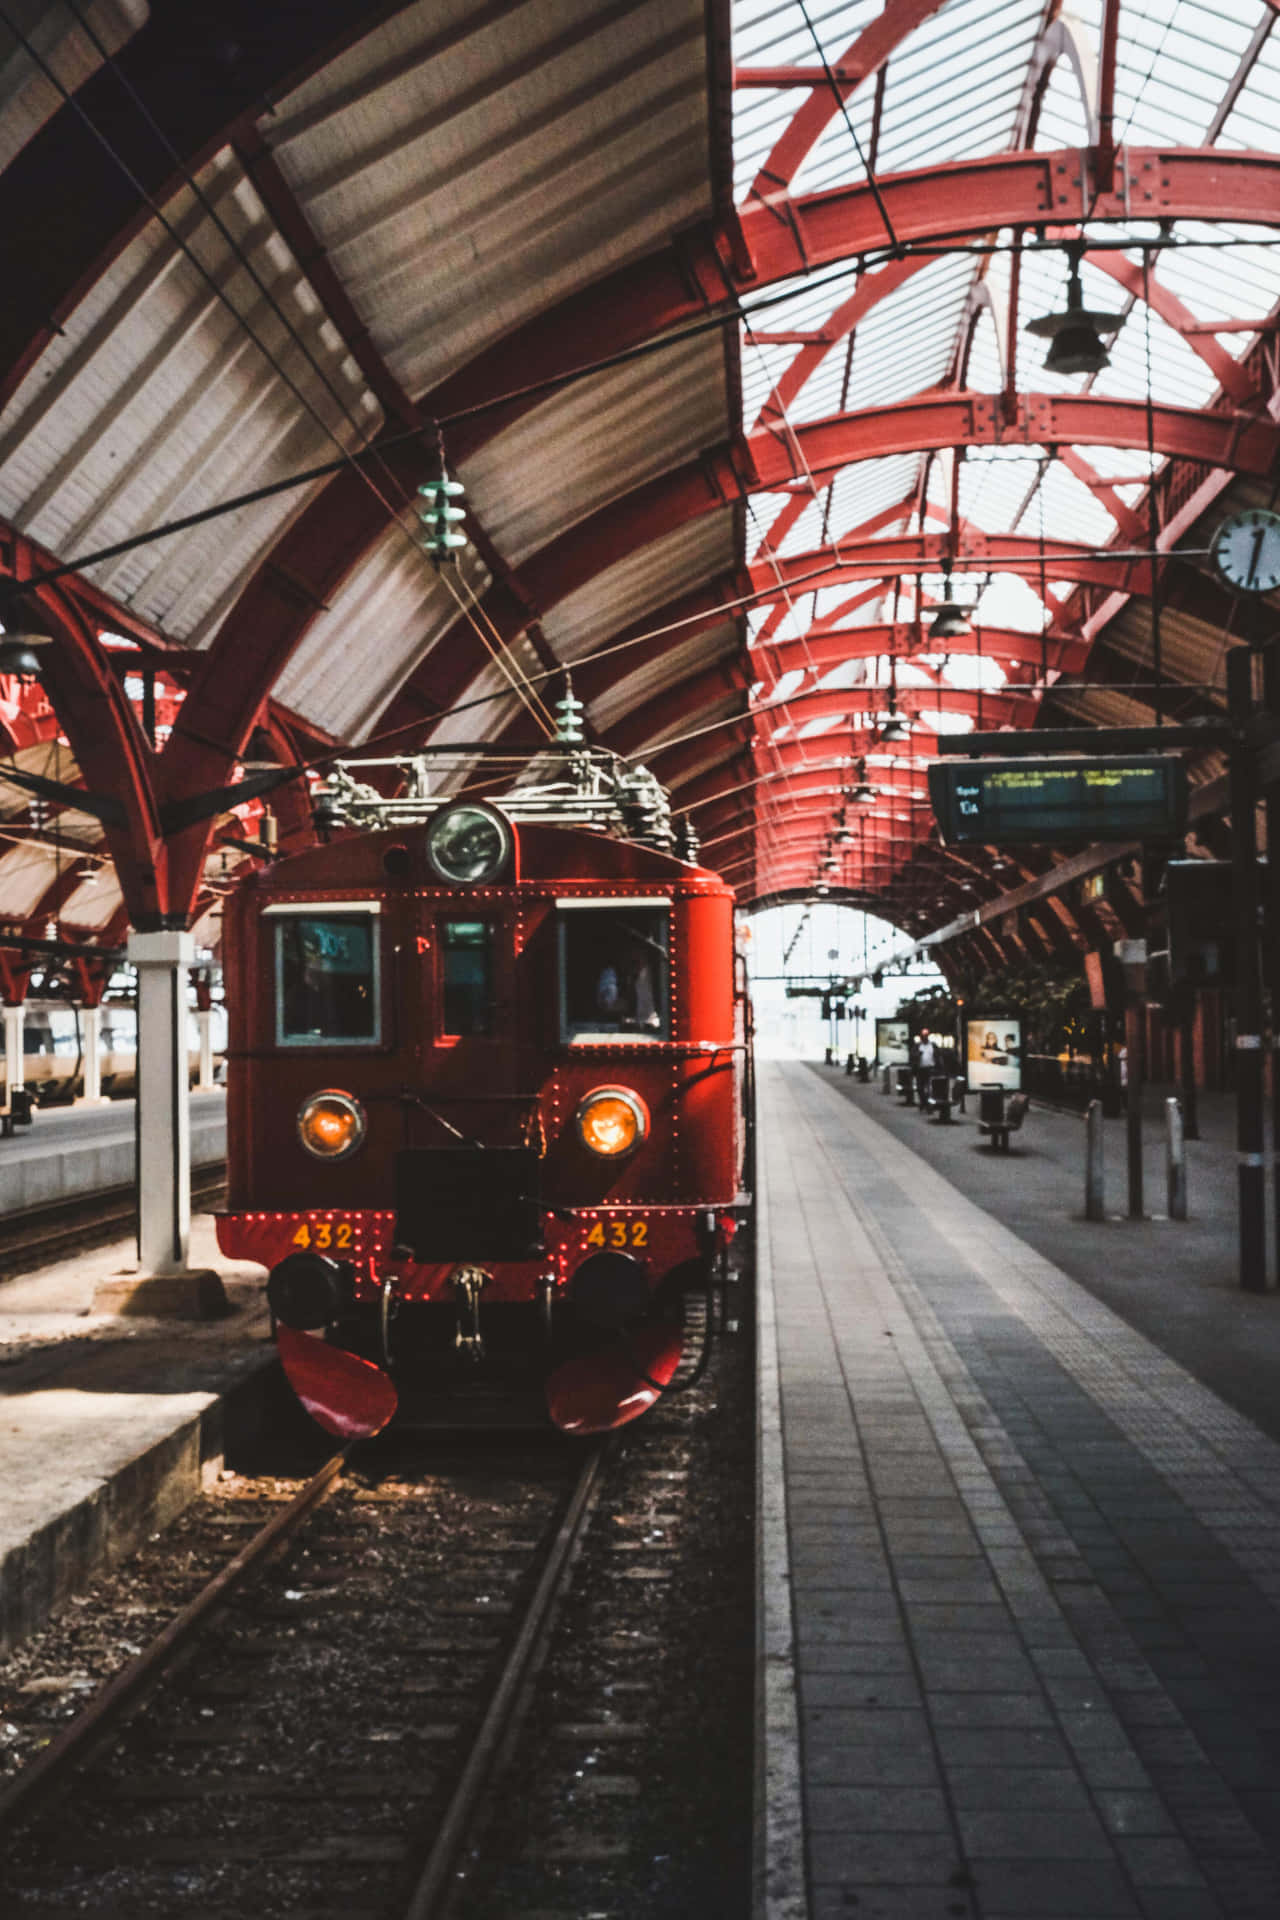 A Red Train Is Parked At A Train Station